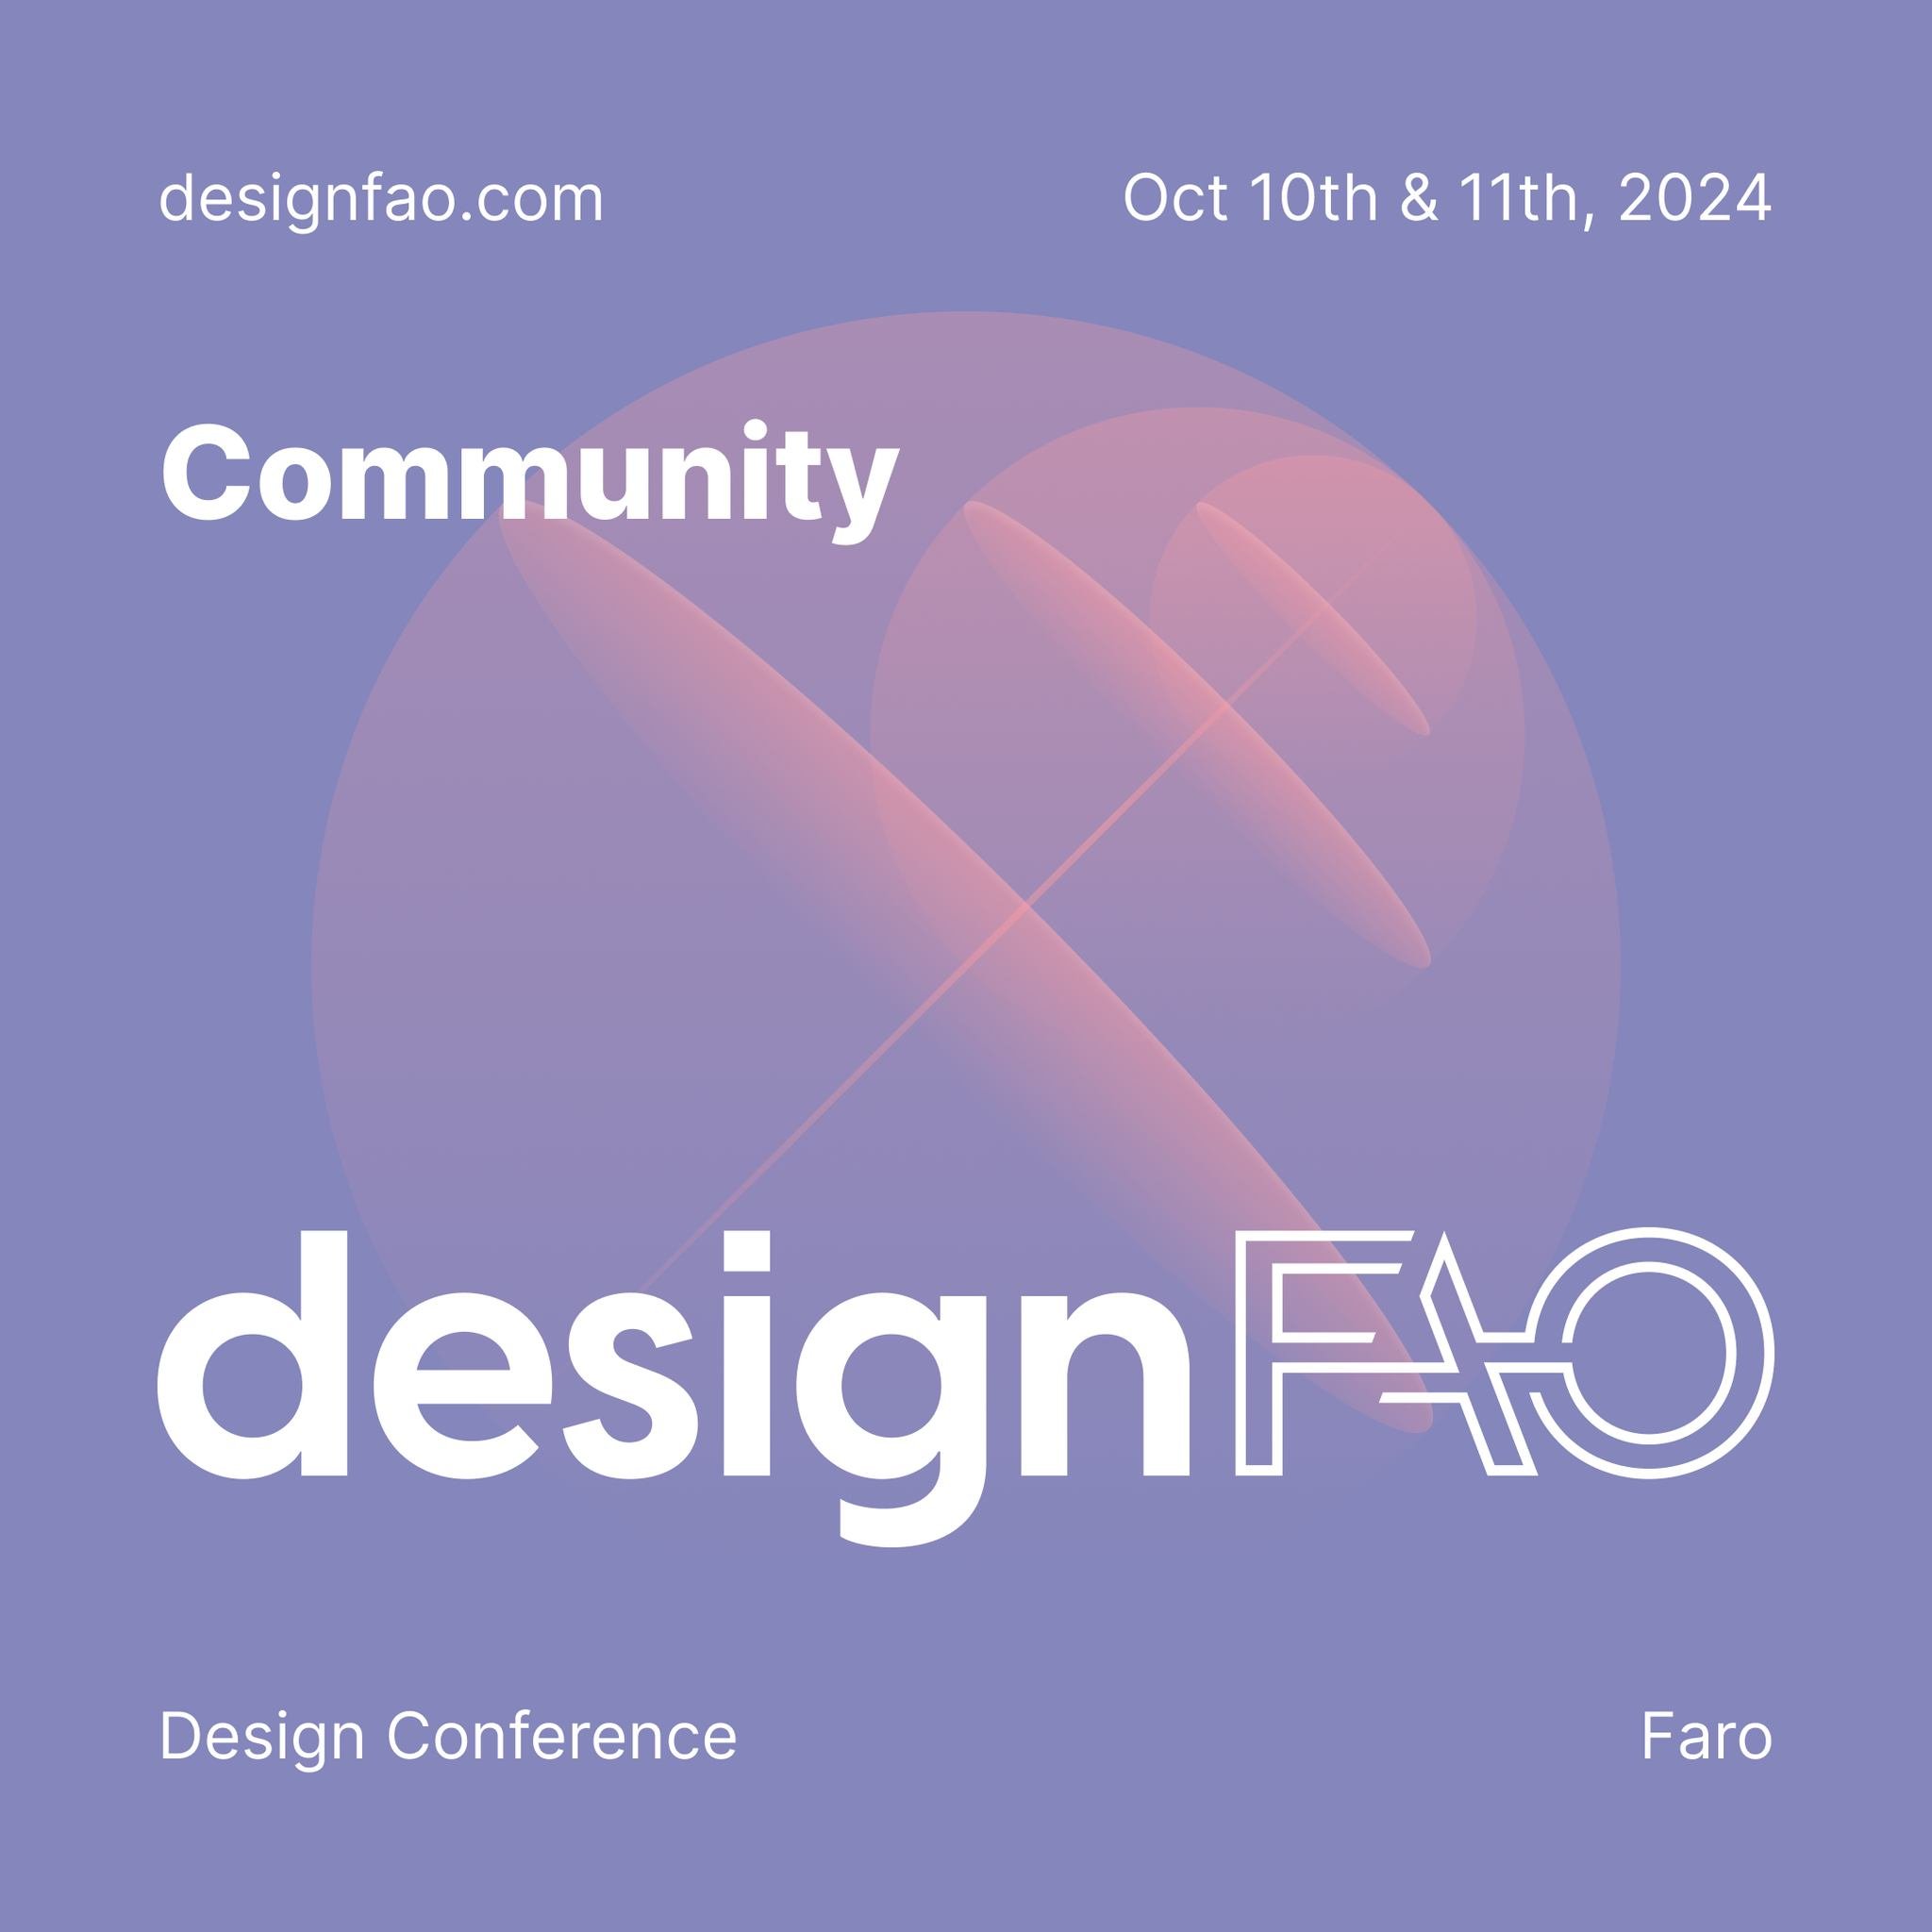 Community 
Connect with a vibrant community of design enthusiasts.

Secure your tickets now and be at the forefront of creativity at designFAO 2024!

#designFAO24 #aidesign #designsystems #personalbrand #spatialdesign